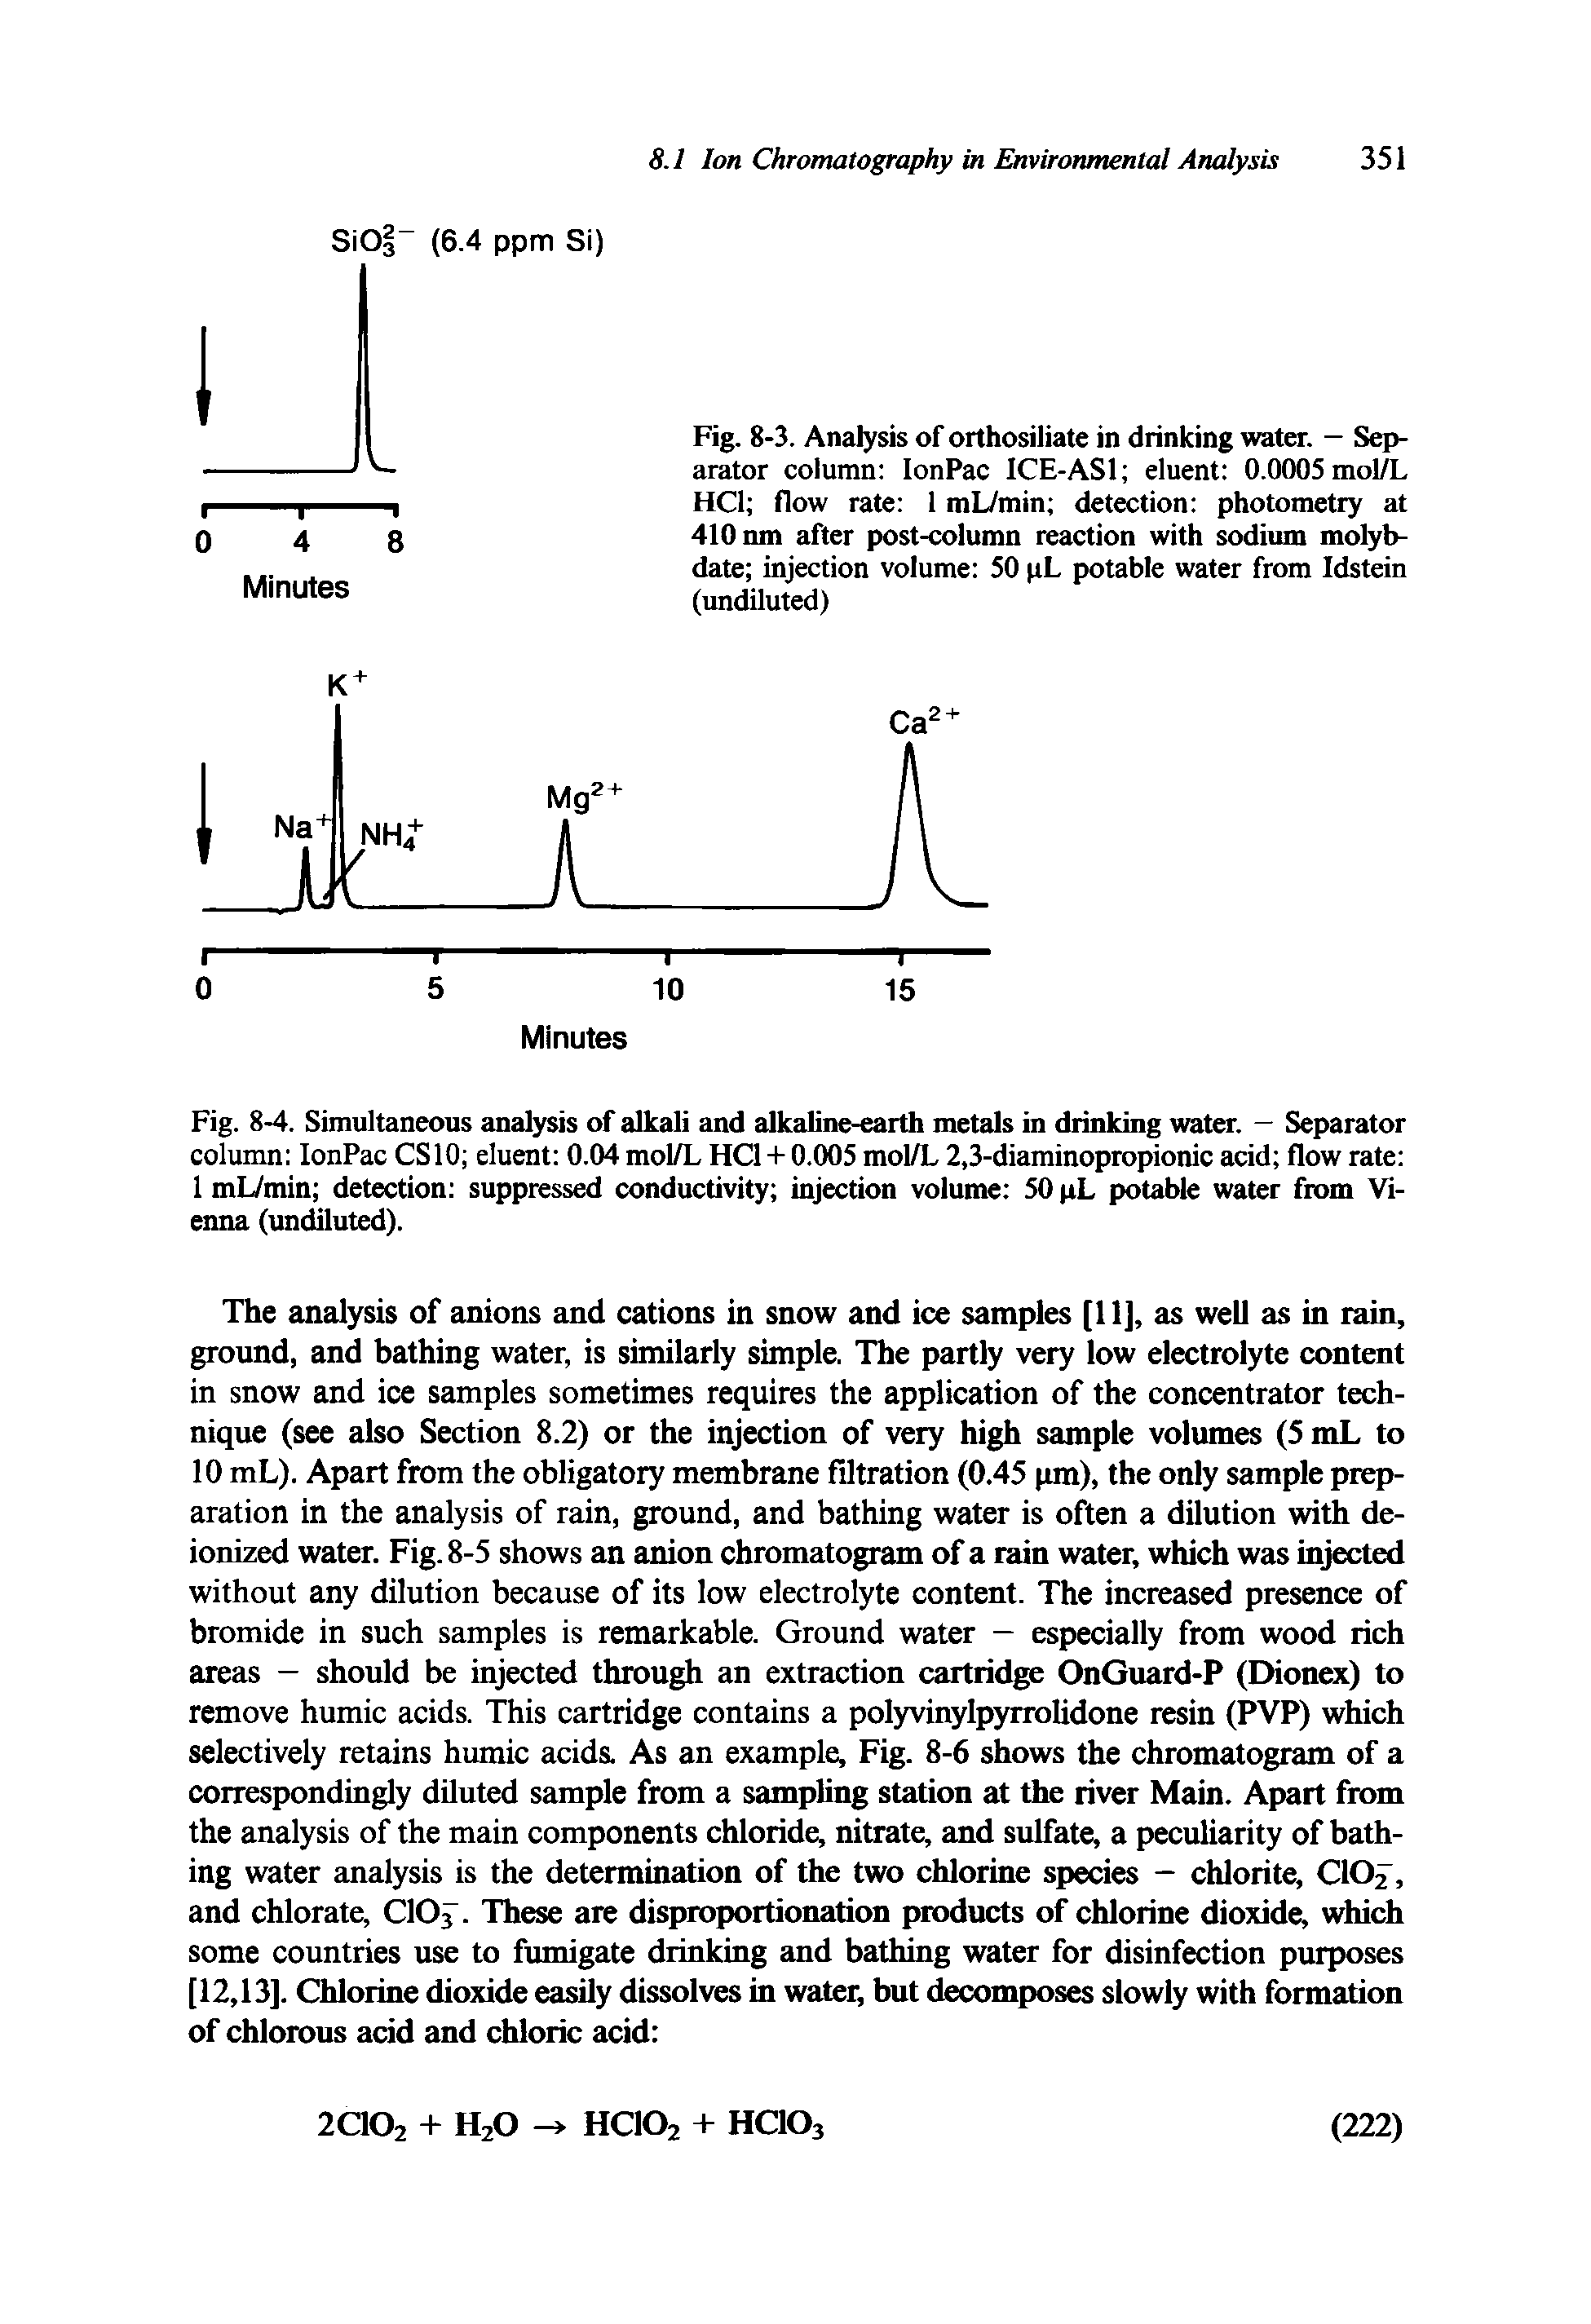 Fig. 8-4. Simultaneous analysis of alkali and alkaline-earth metals in drinking water. — Separator column IonPac CS10 eluent 0.04 mol/L HC1 + 0.005 mol/L 2,3-diaminopropionic acid flow rate 1 mL/min detection suppressed conductivity injection volume 50 pL potable water from Vienna (undiluted).